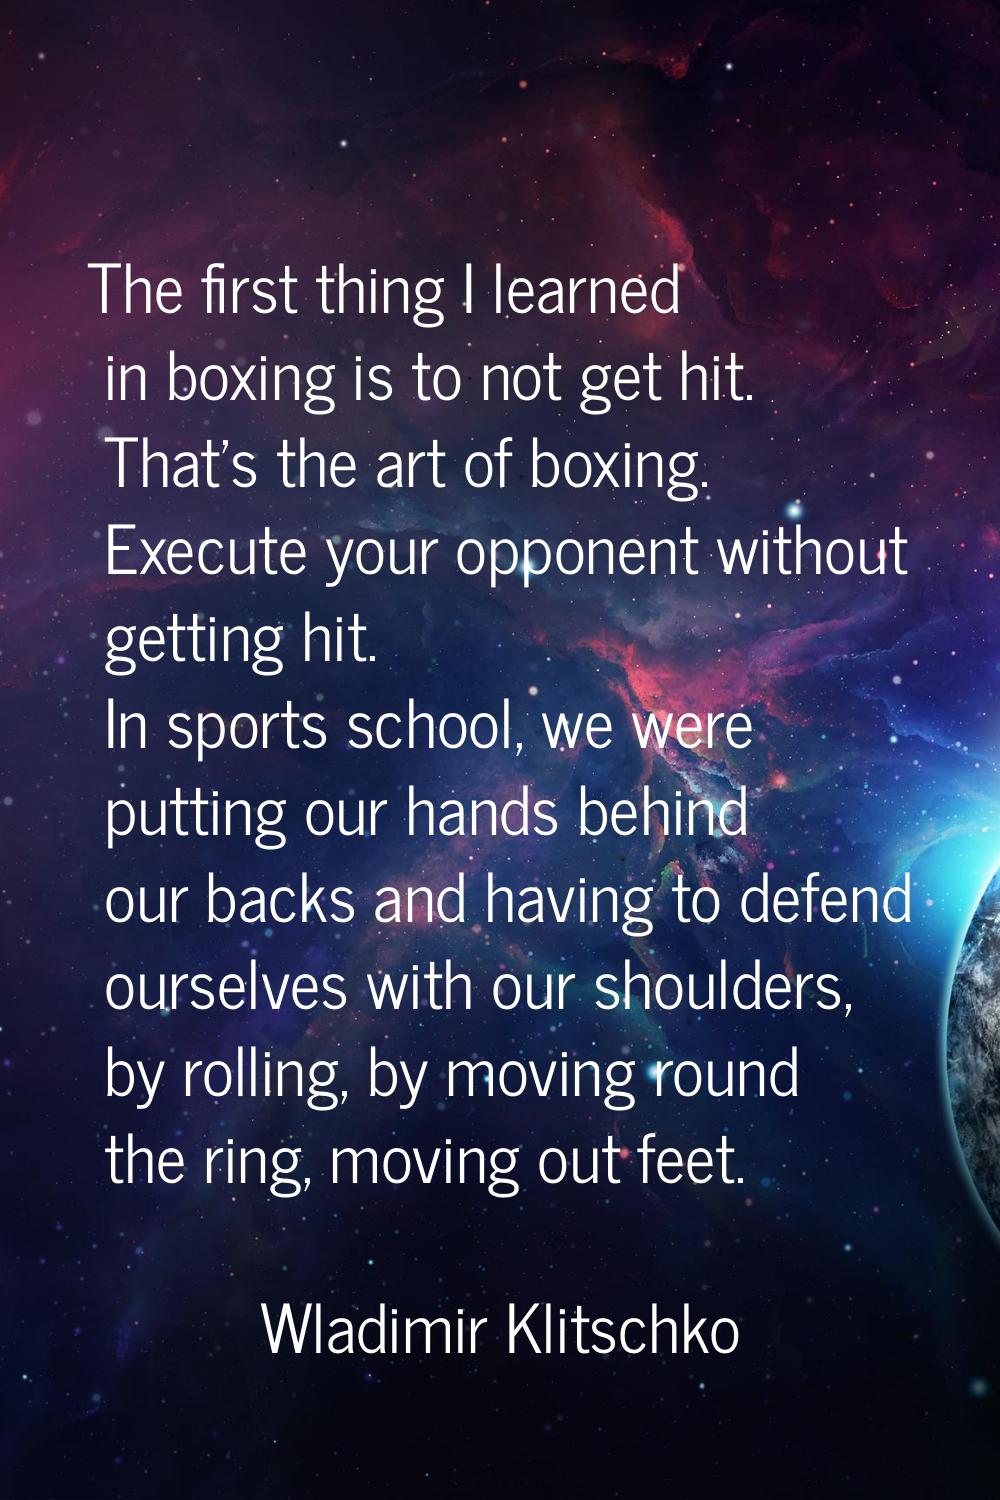 The first thing I learned in boxing is to not get hit. That's the art of boxing. Execute your oppon